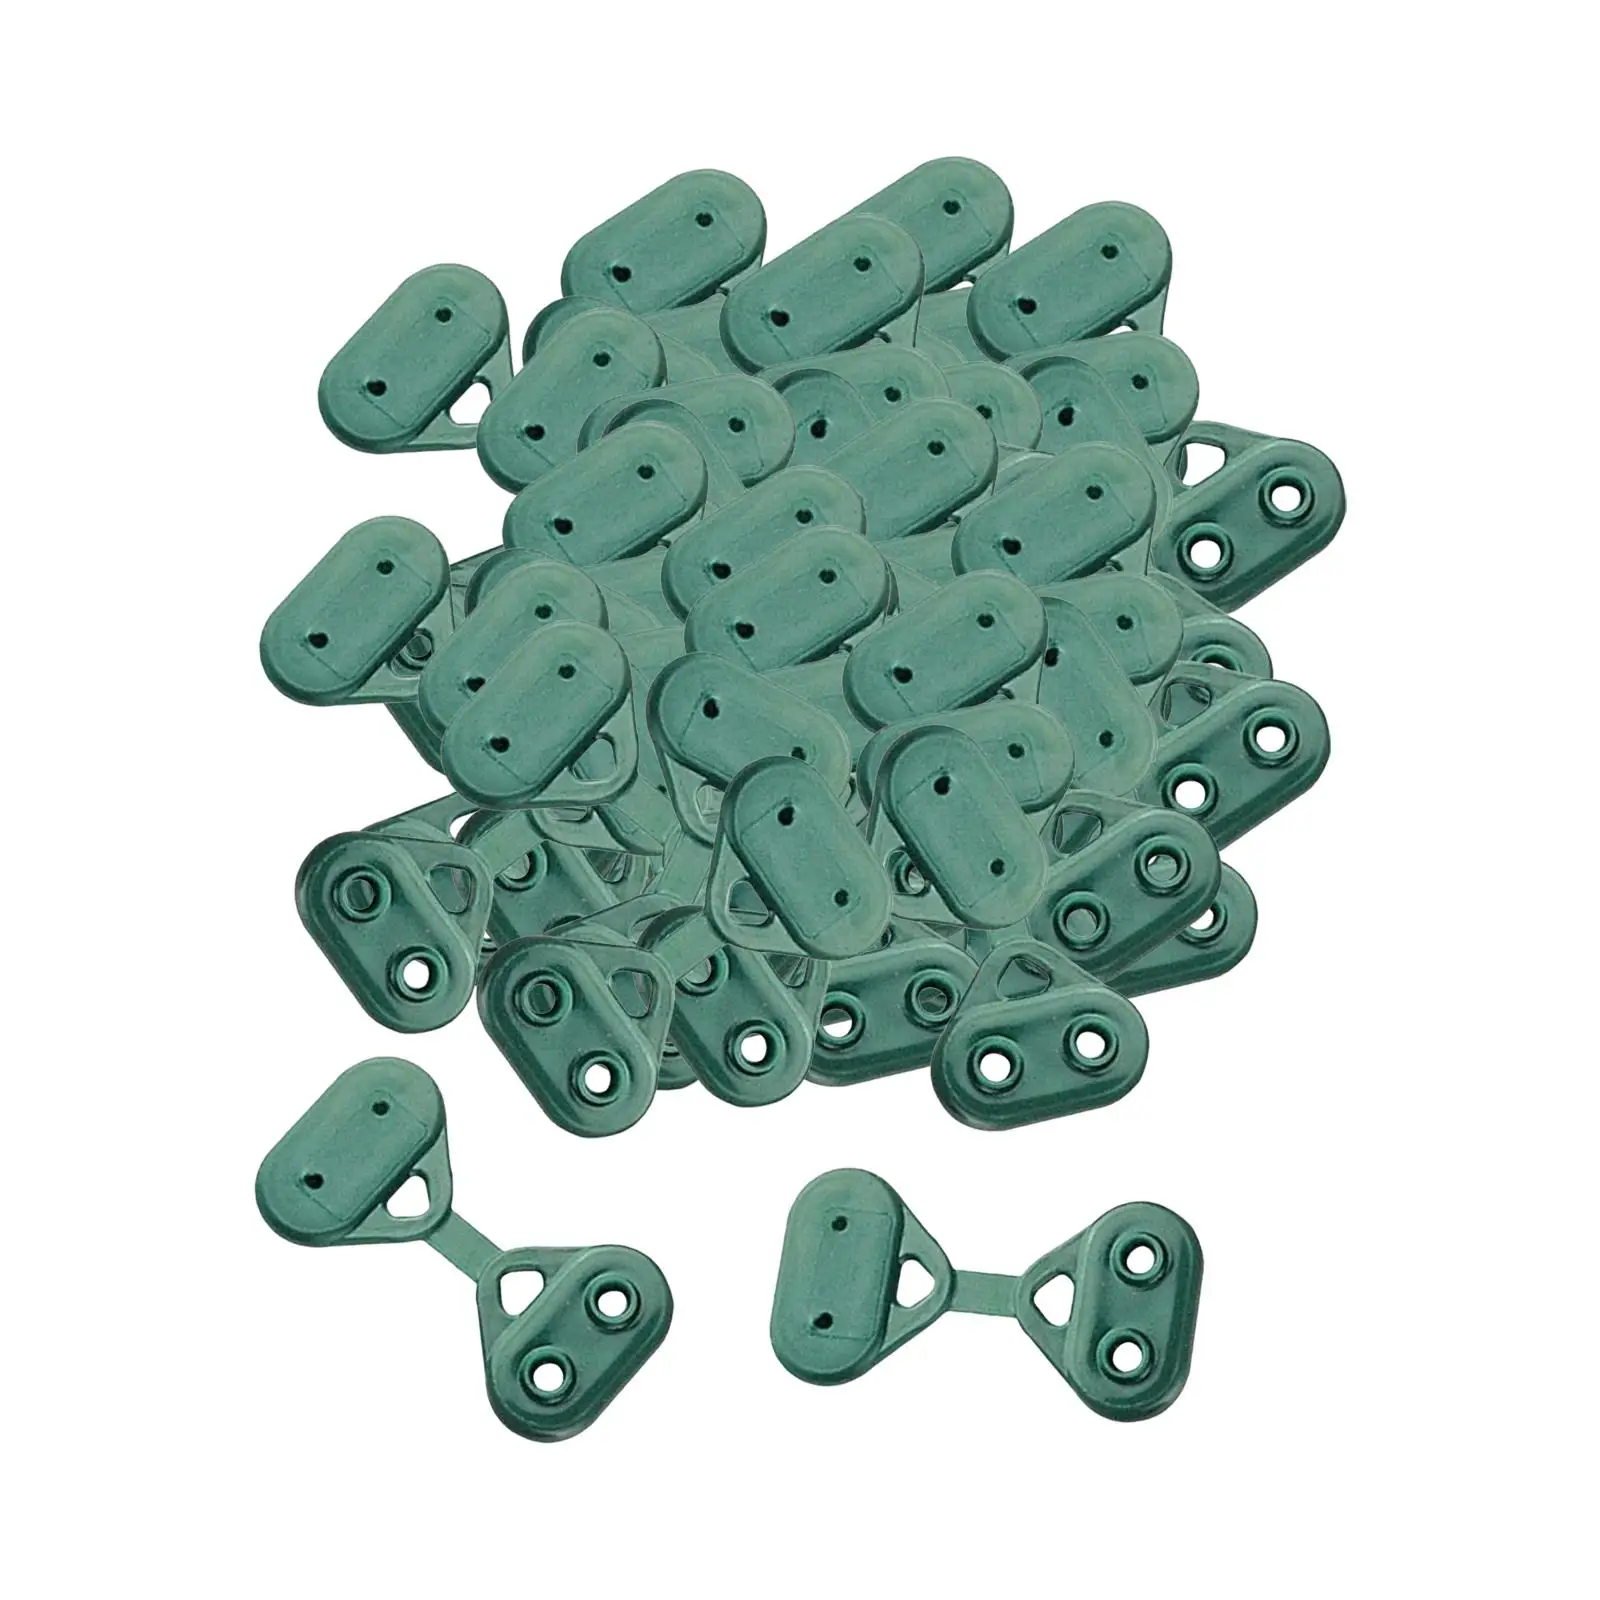 50Pcs Shade Cloth Clips Lock Grip Fixed Clips Shade Hook Clips for Balcony Agricultural Net Greenhouse Anti Bird Netting Outdoor